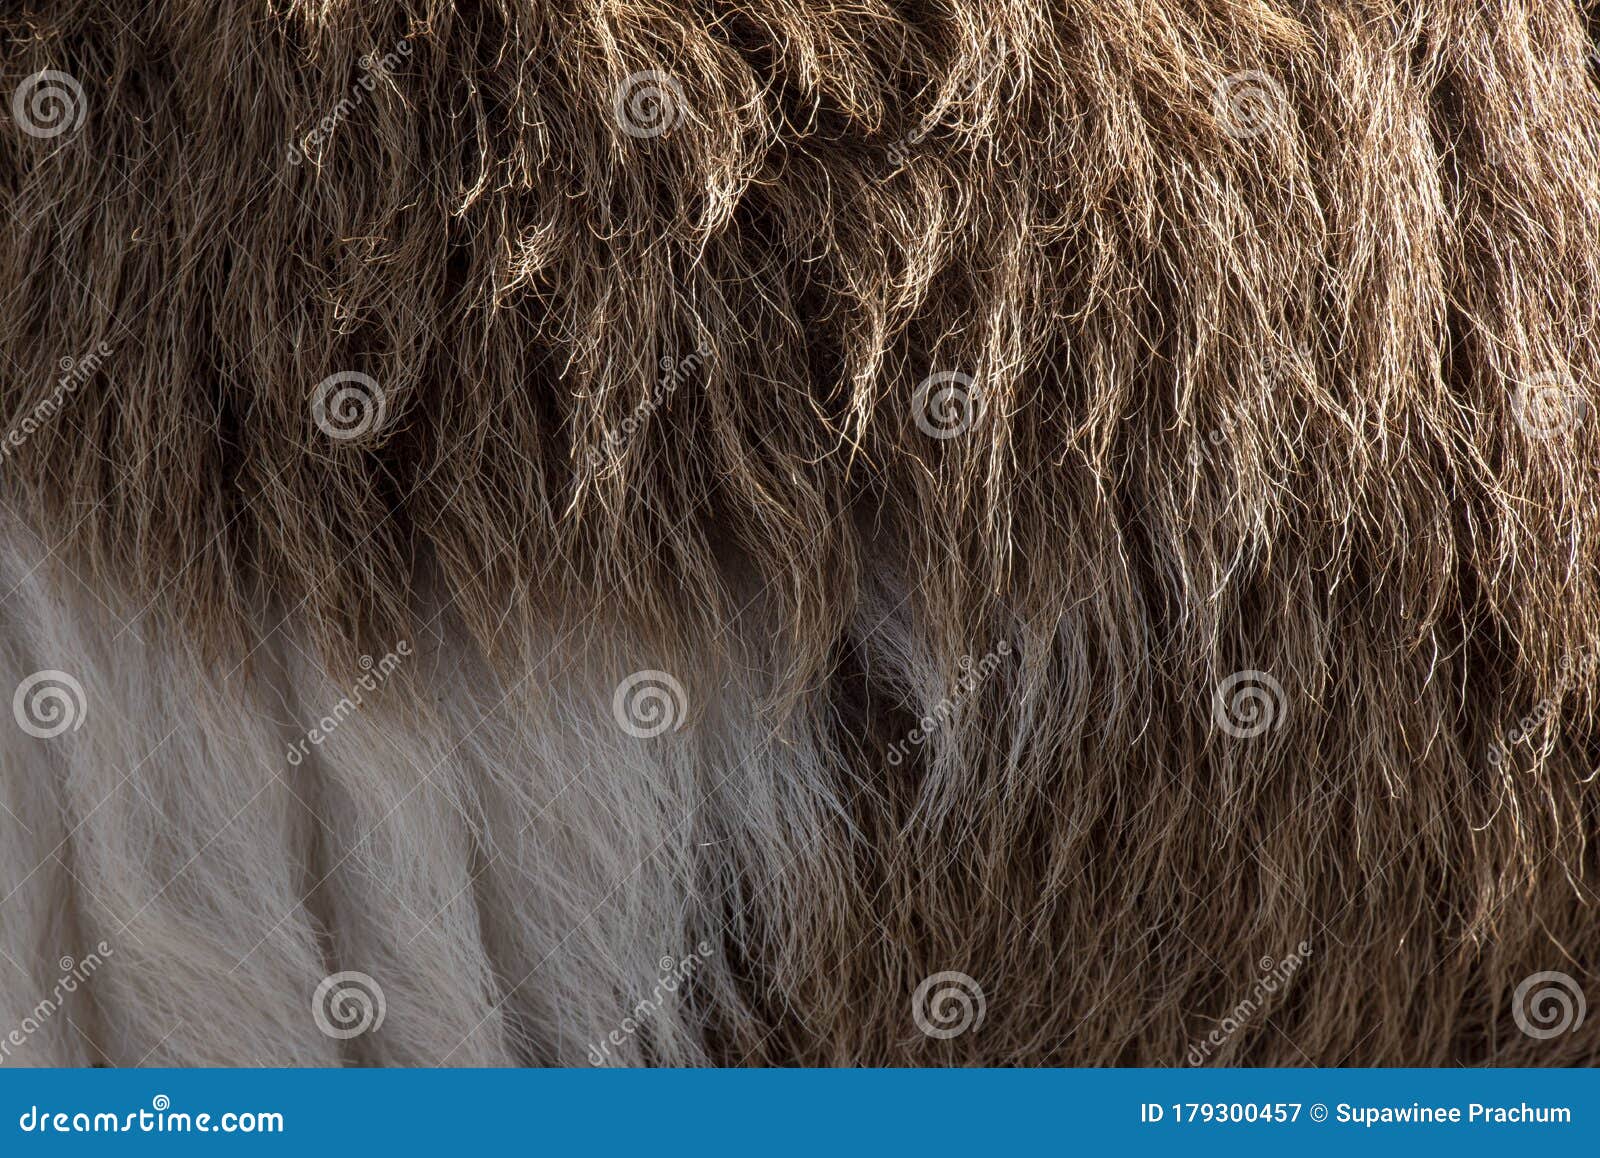 fleece white and brown,close up of fleece, exture background